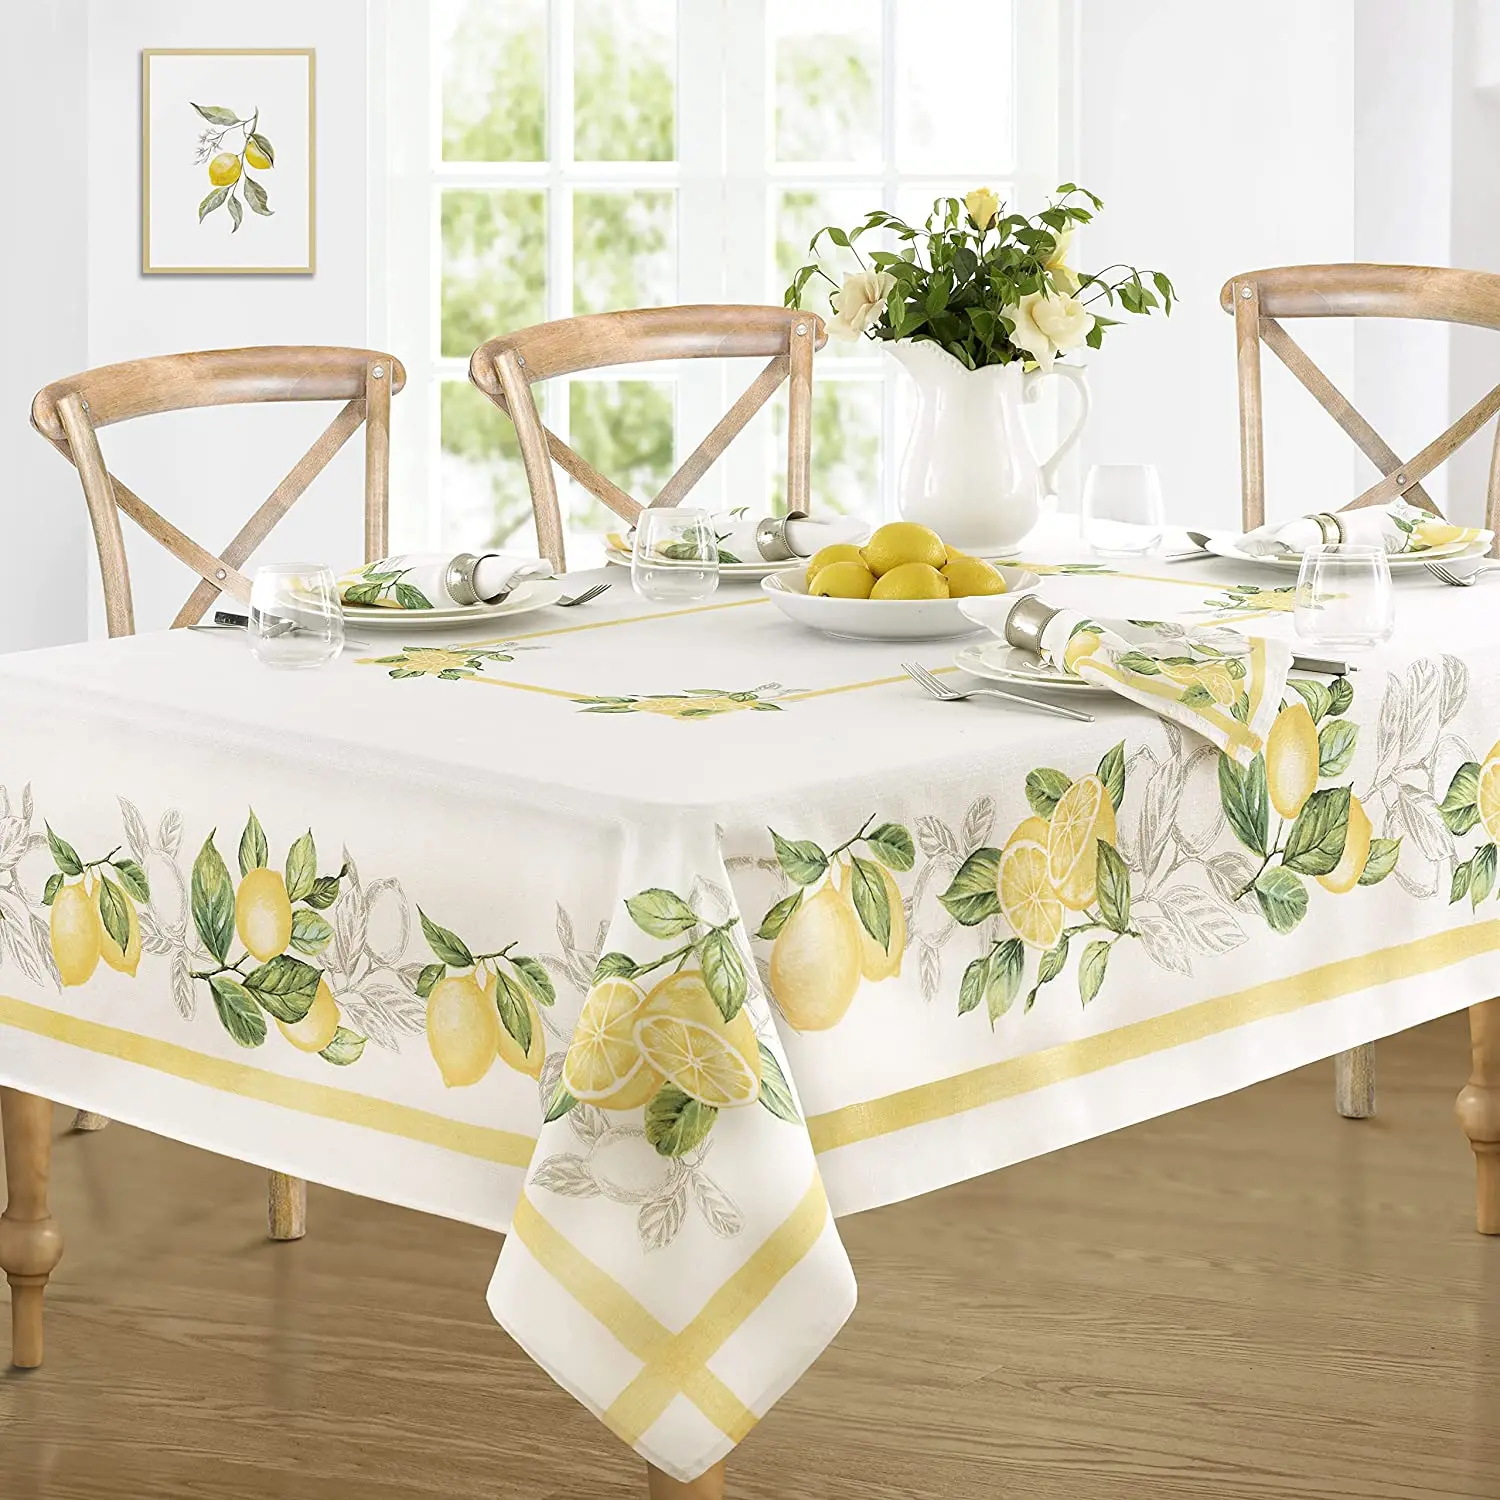 

Lemon Citrus Linen Rectangular Tablecloth for Table Kitchen Decor Anti-stain Dining Table Tablecloth Table Cover Wedding